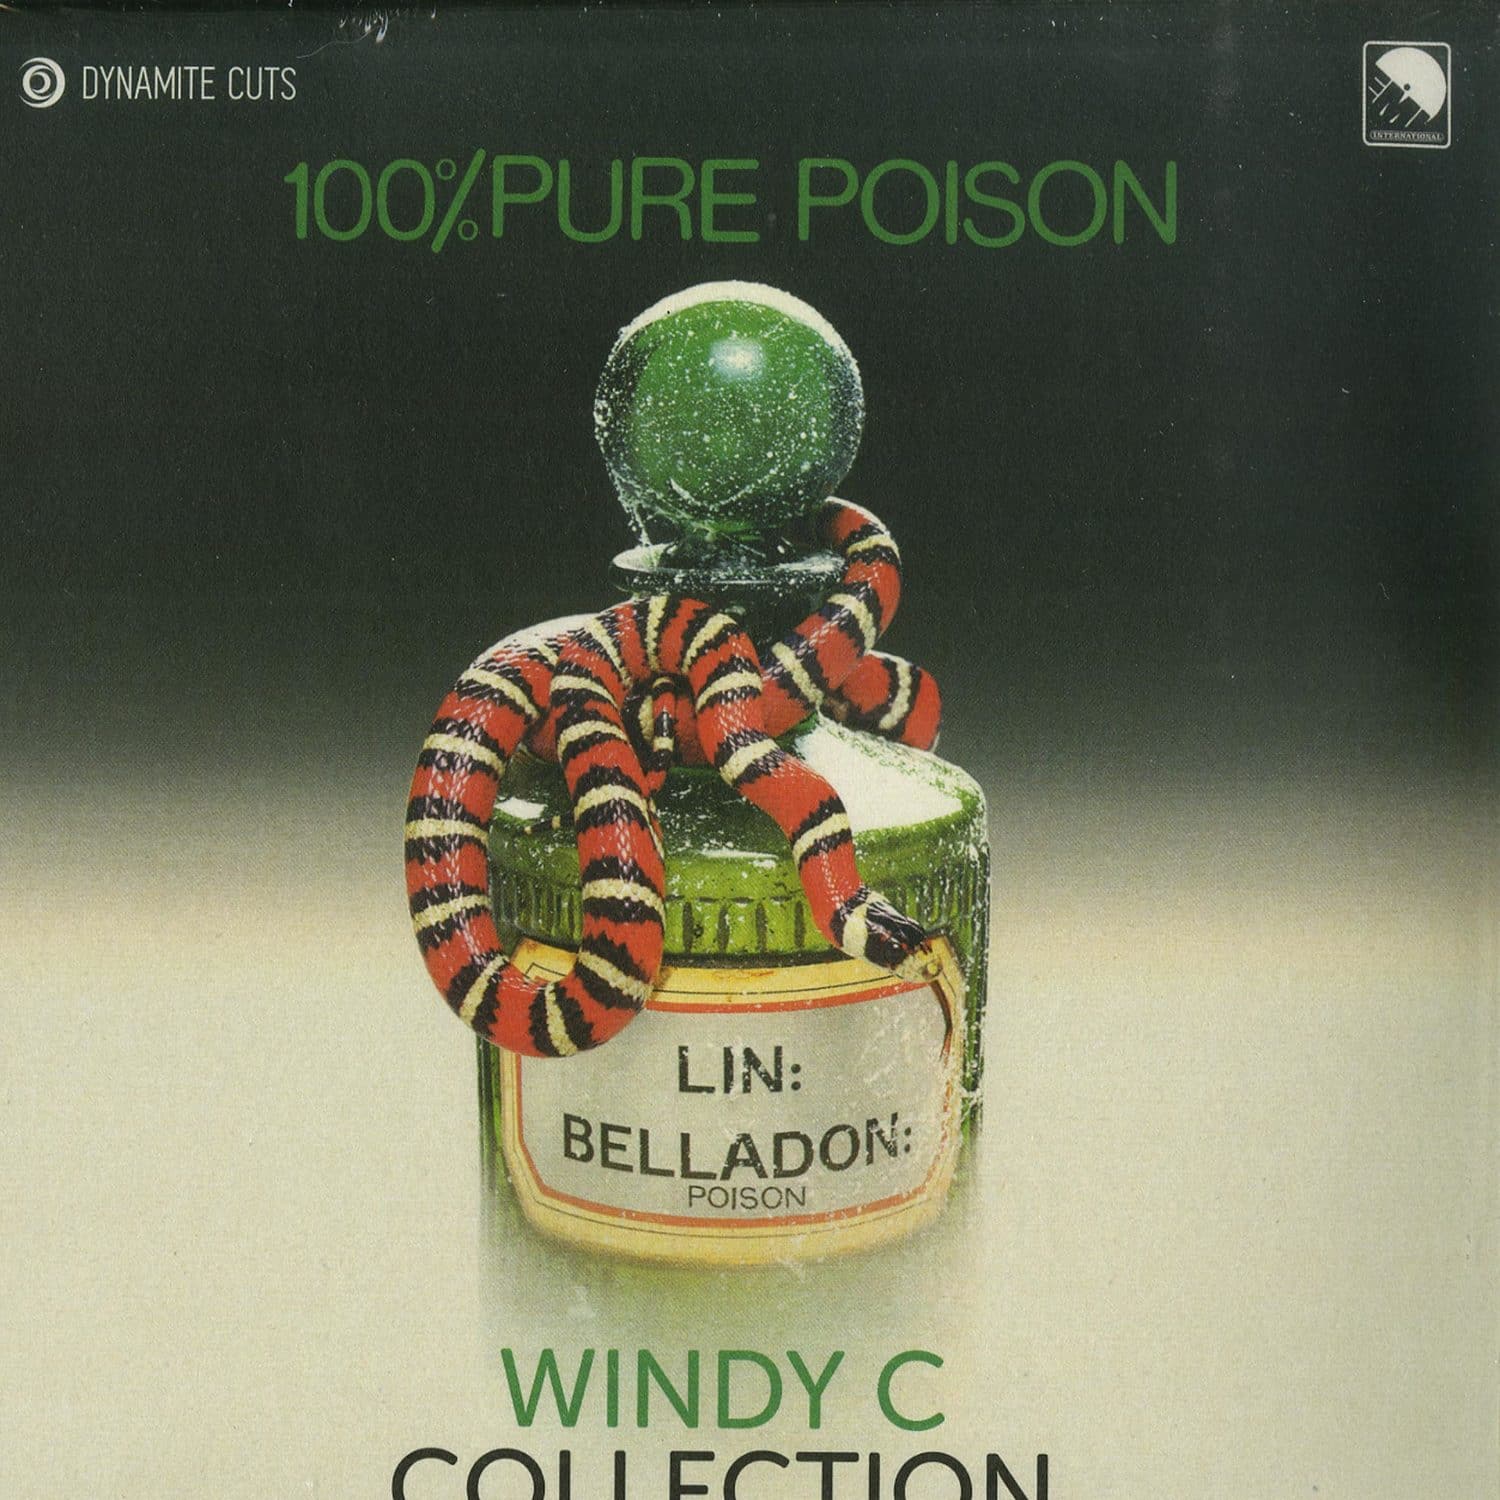 100% Pure Poison - WINDY C COLLECTION 